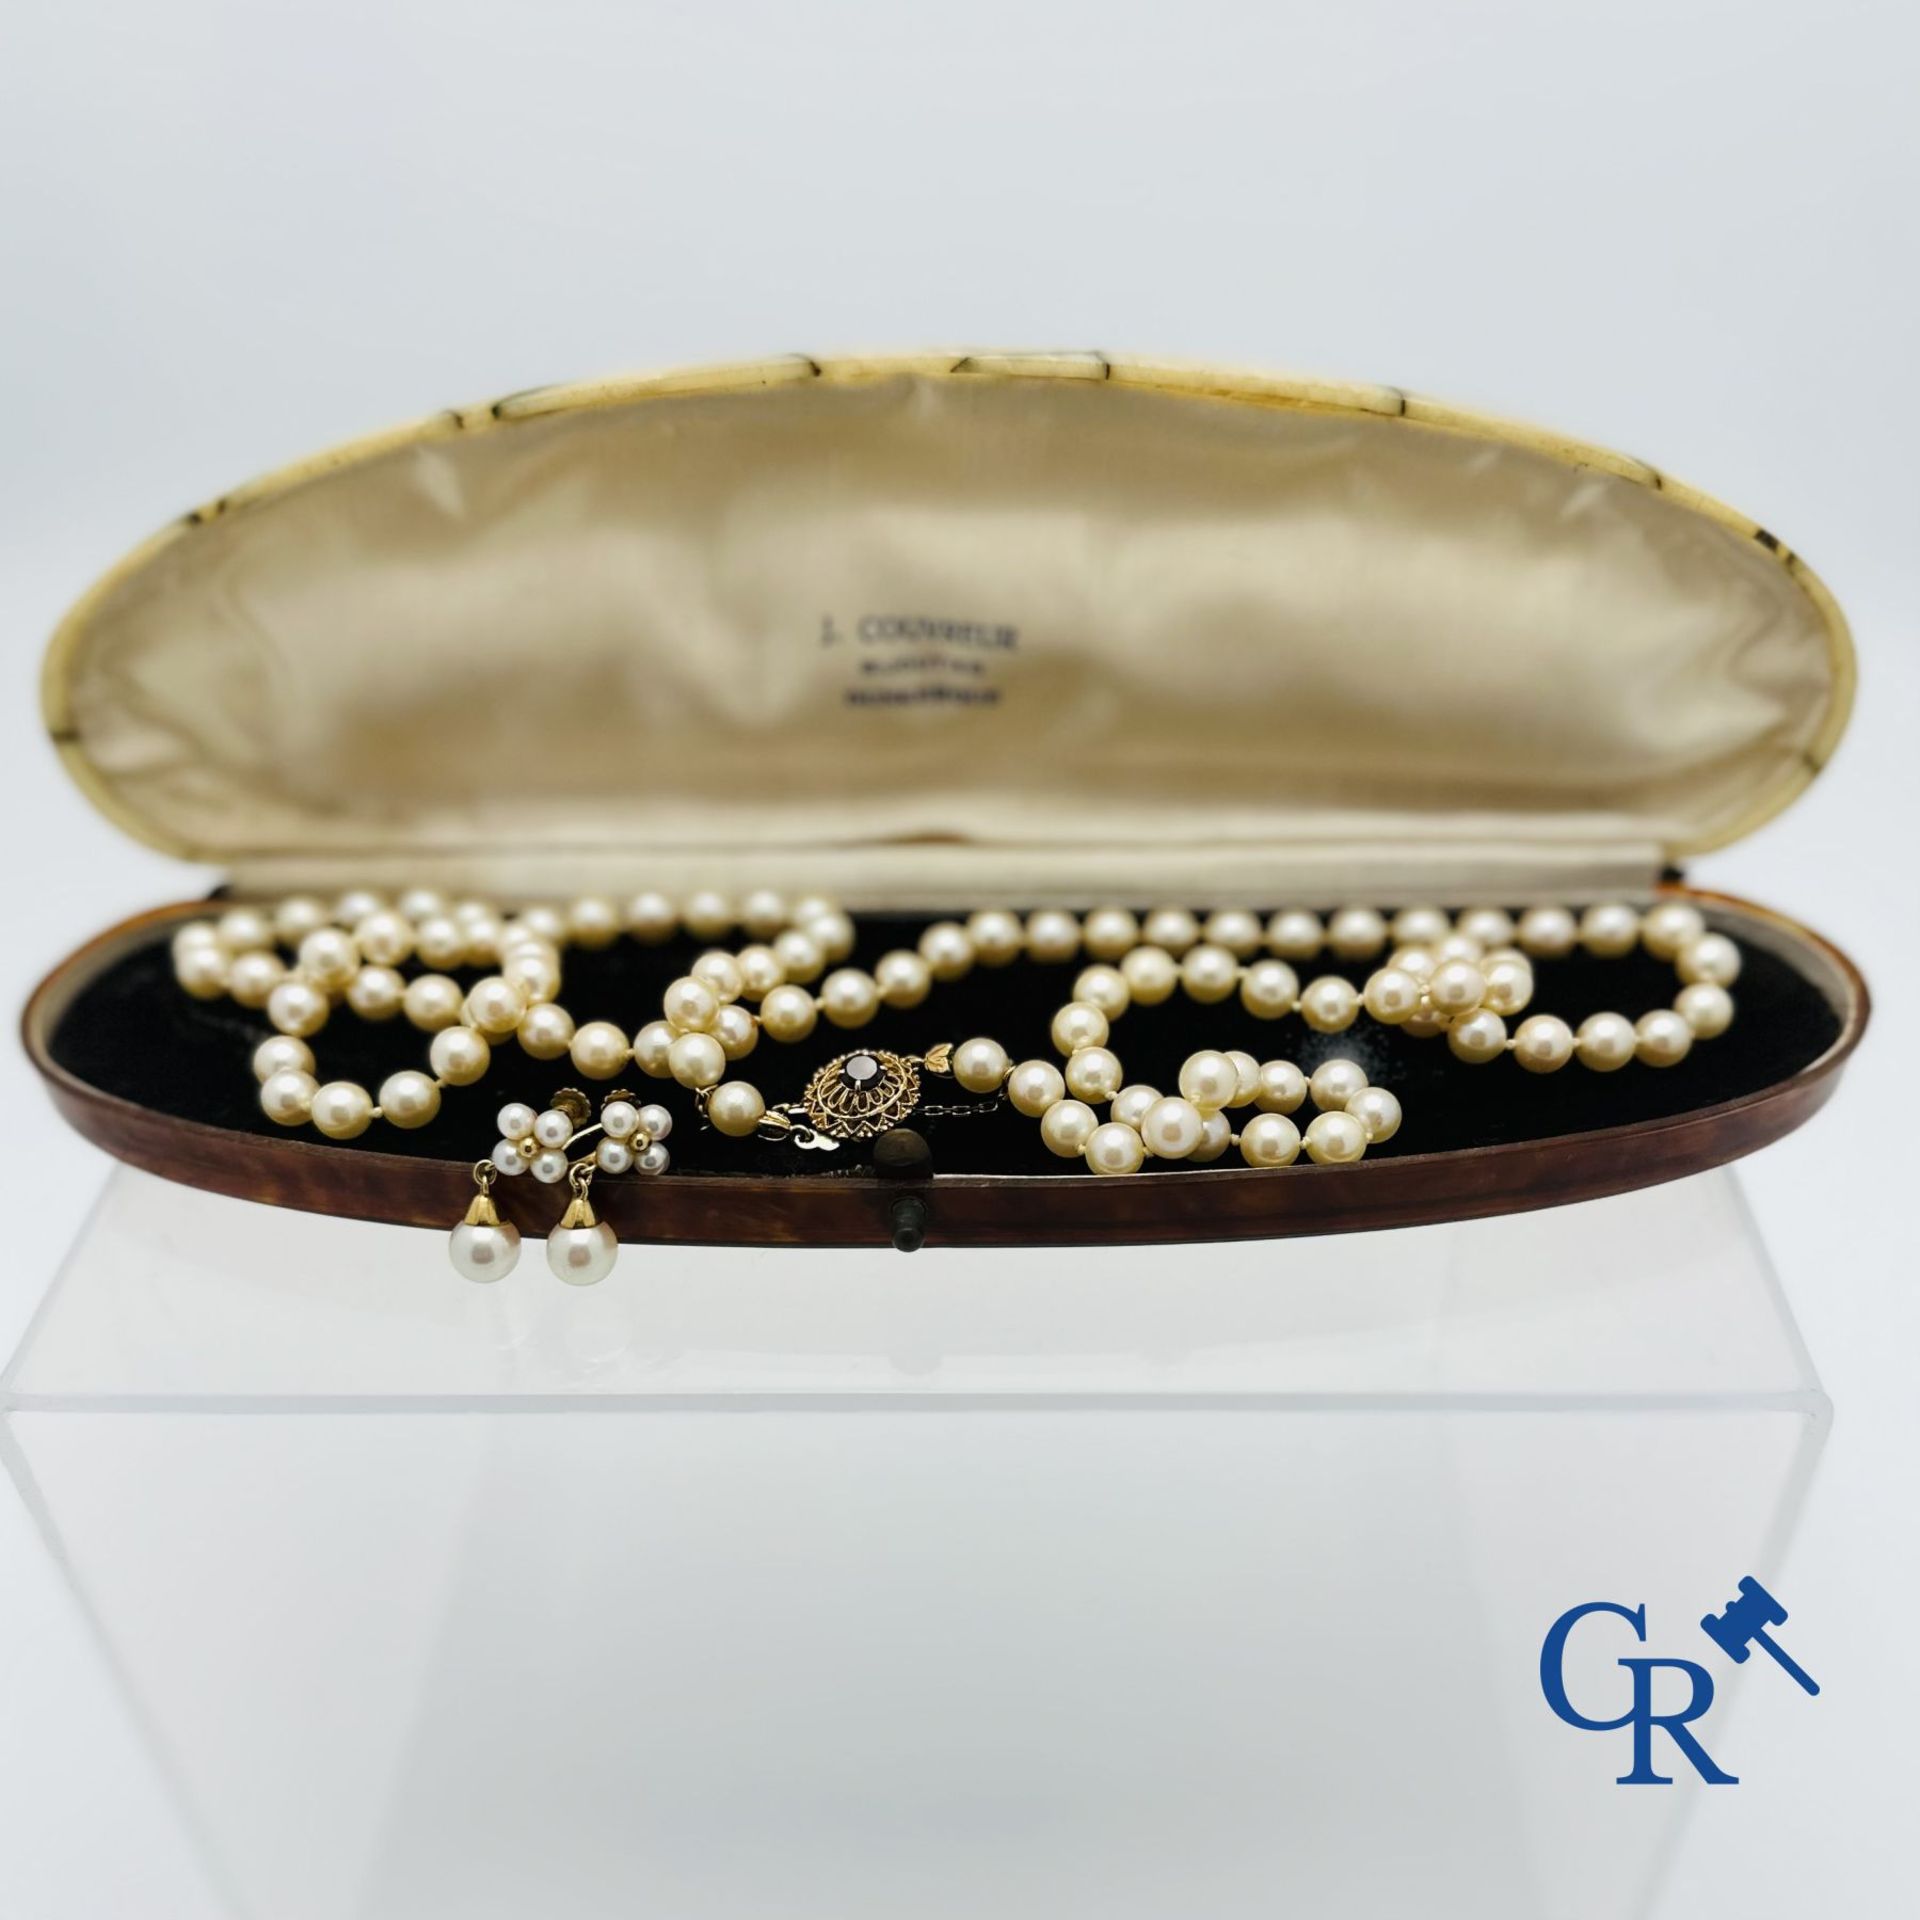 Jewellery: Lot consisting of a pearl necklace with gold clasp 18K and a pair of earrings in gold 18K - Image 4 of 6